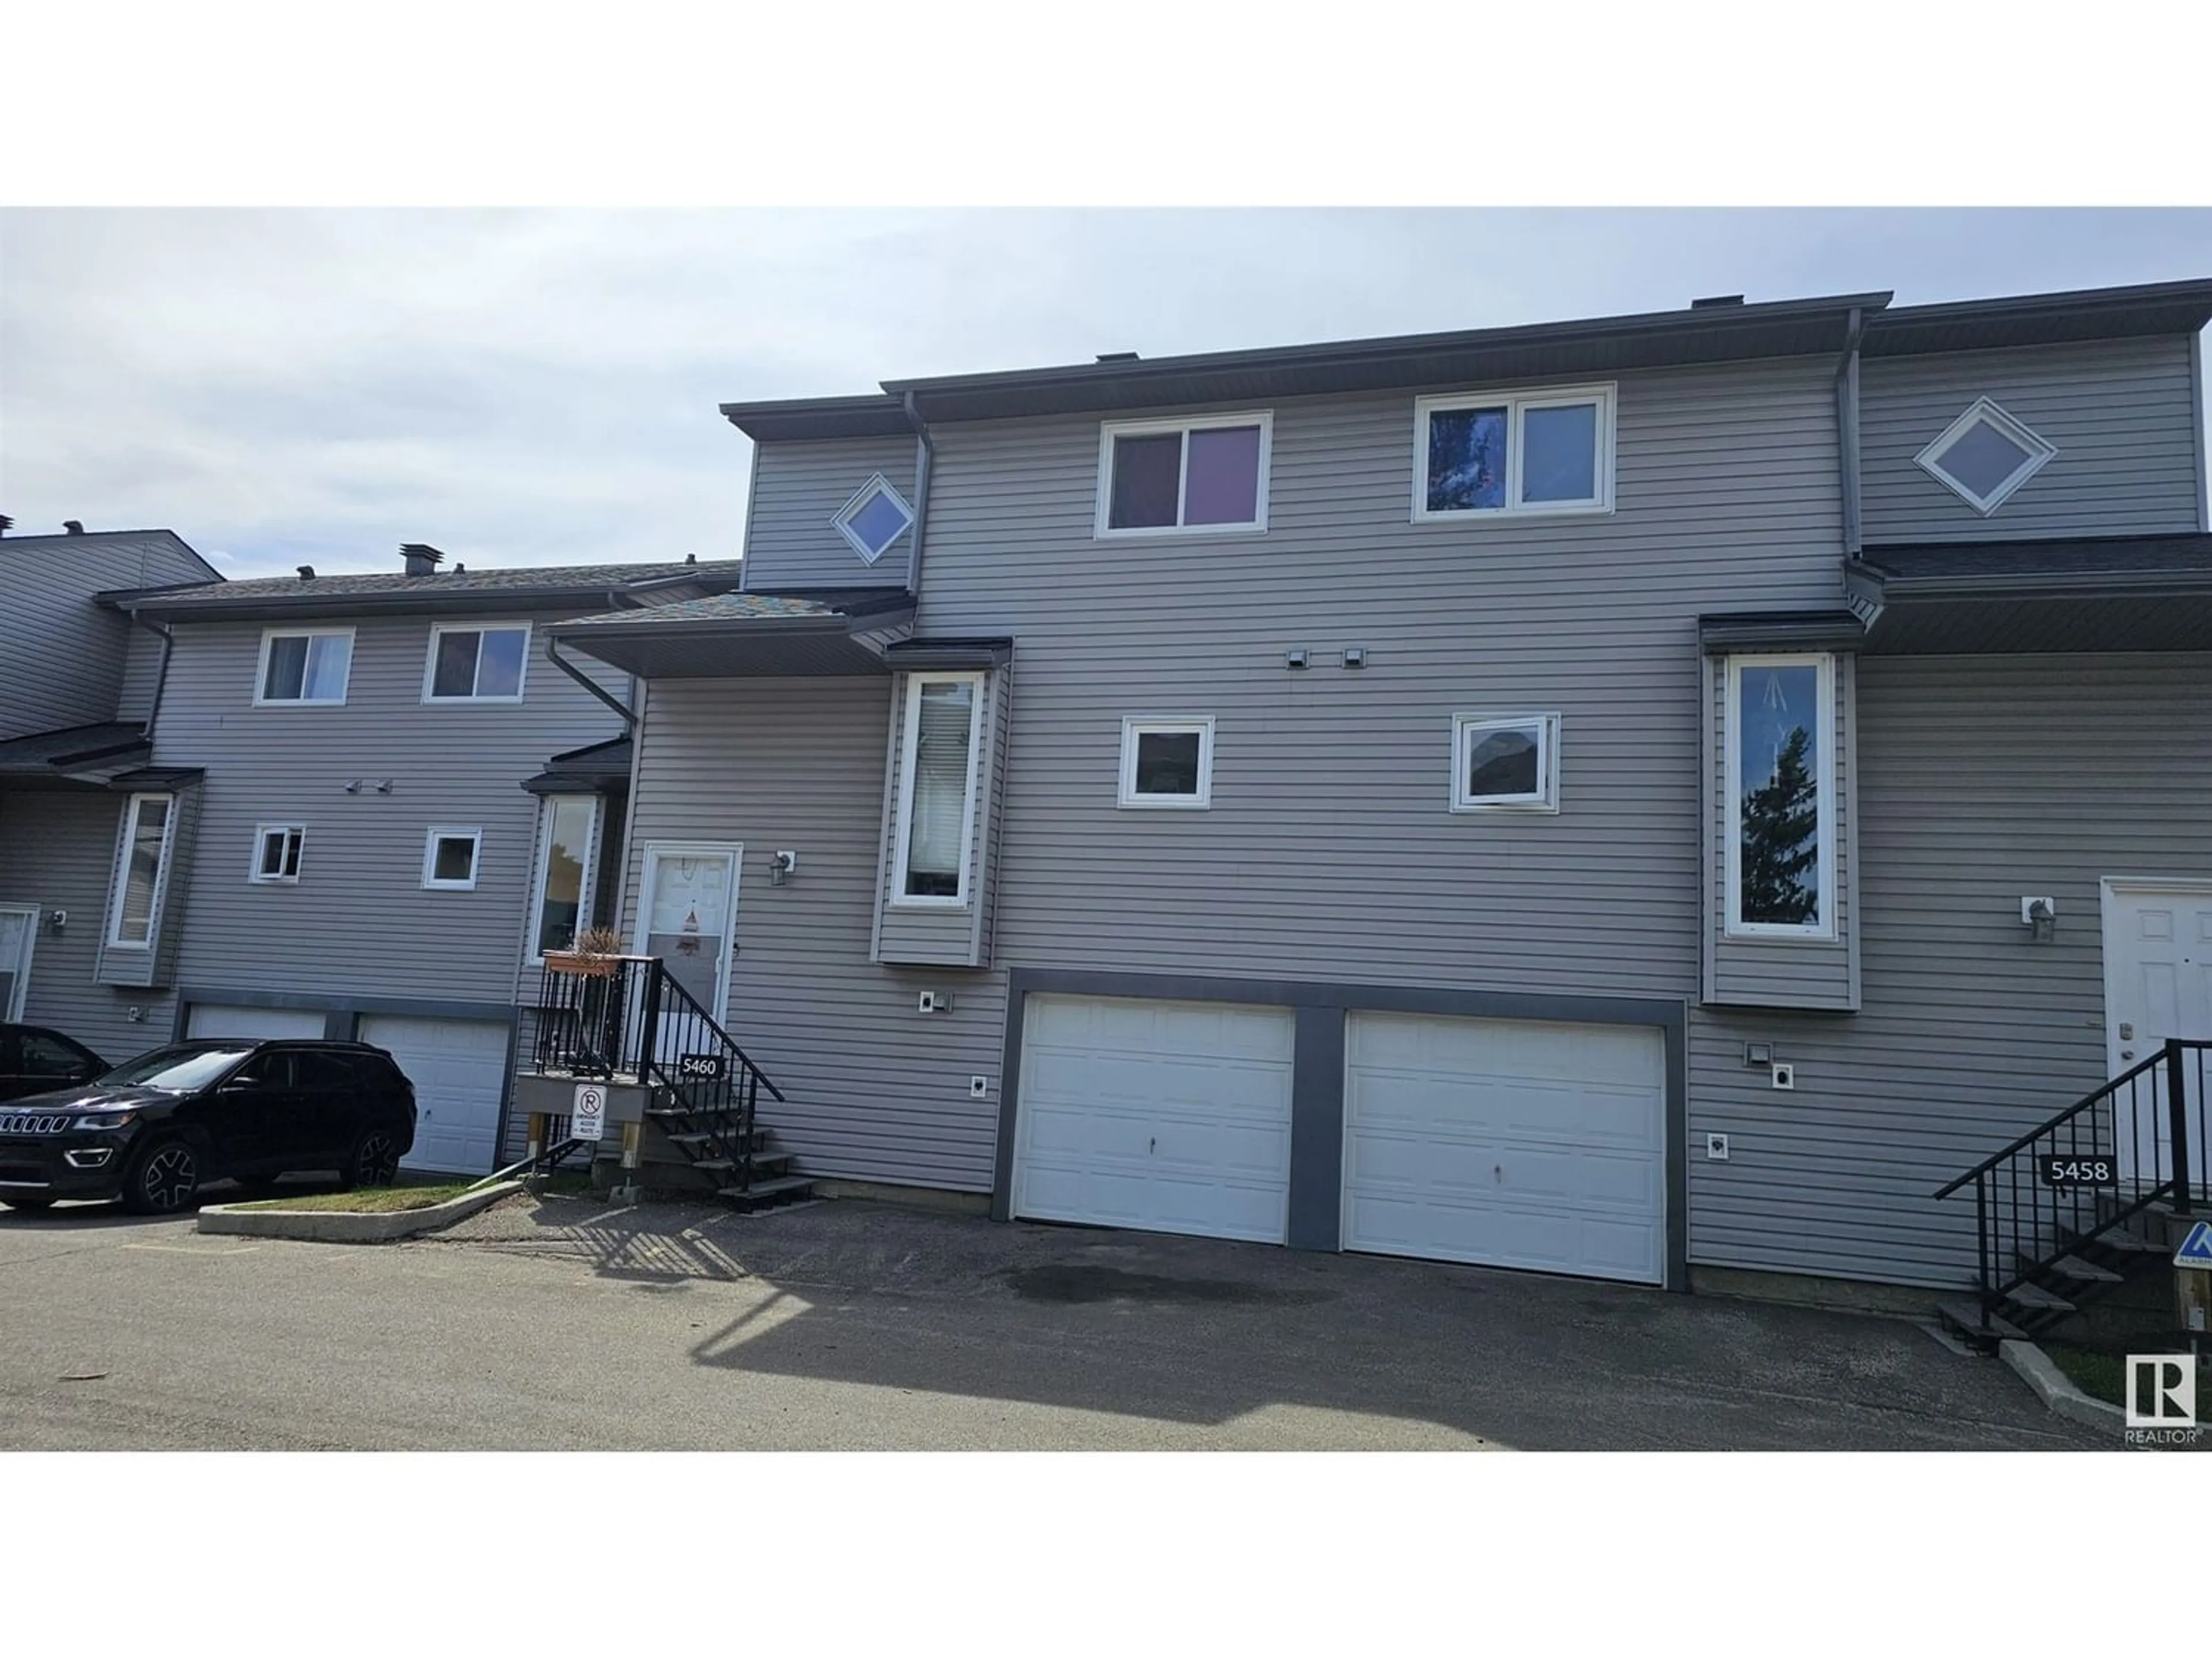 A pic from exterior of the house or condo for 5460 38A AV NW, Edmonton Alberta T6L2H4